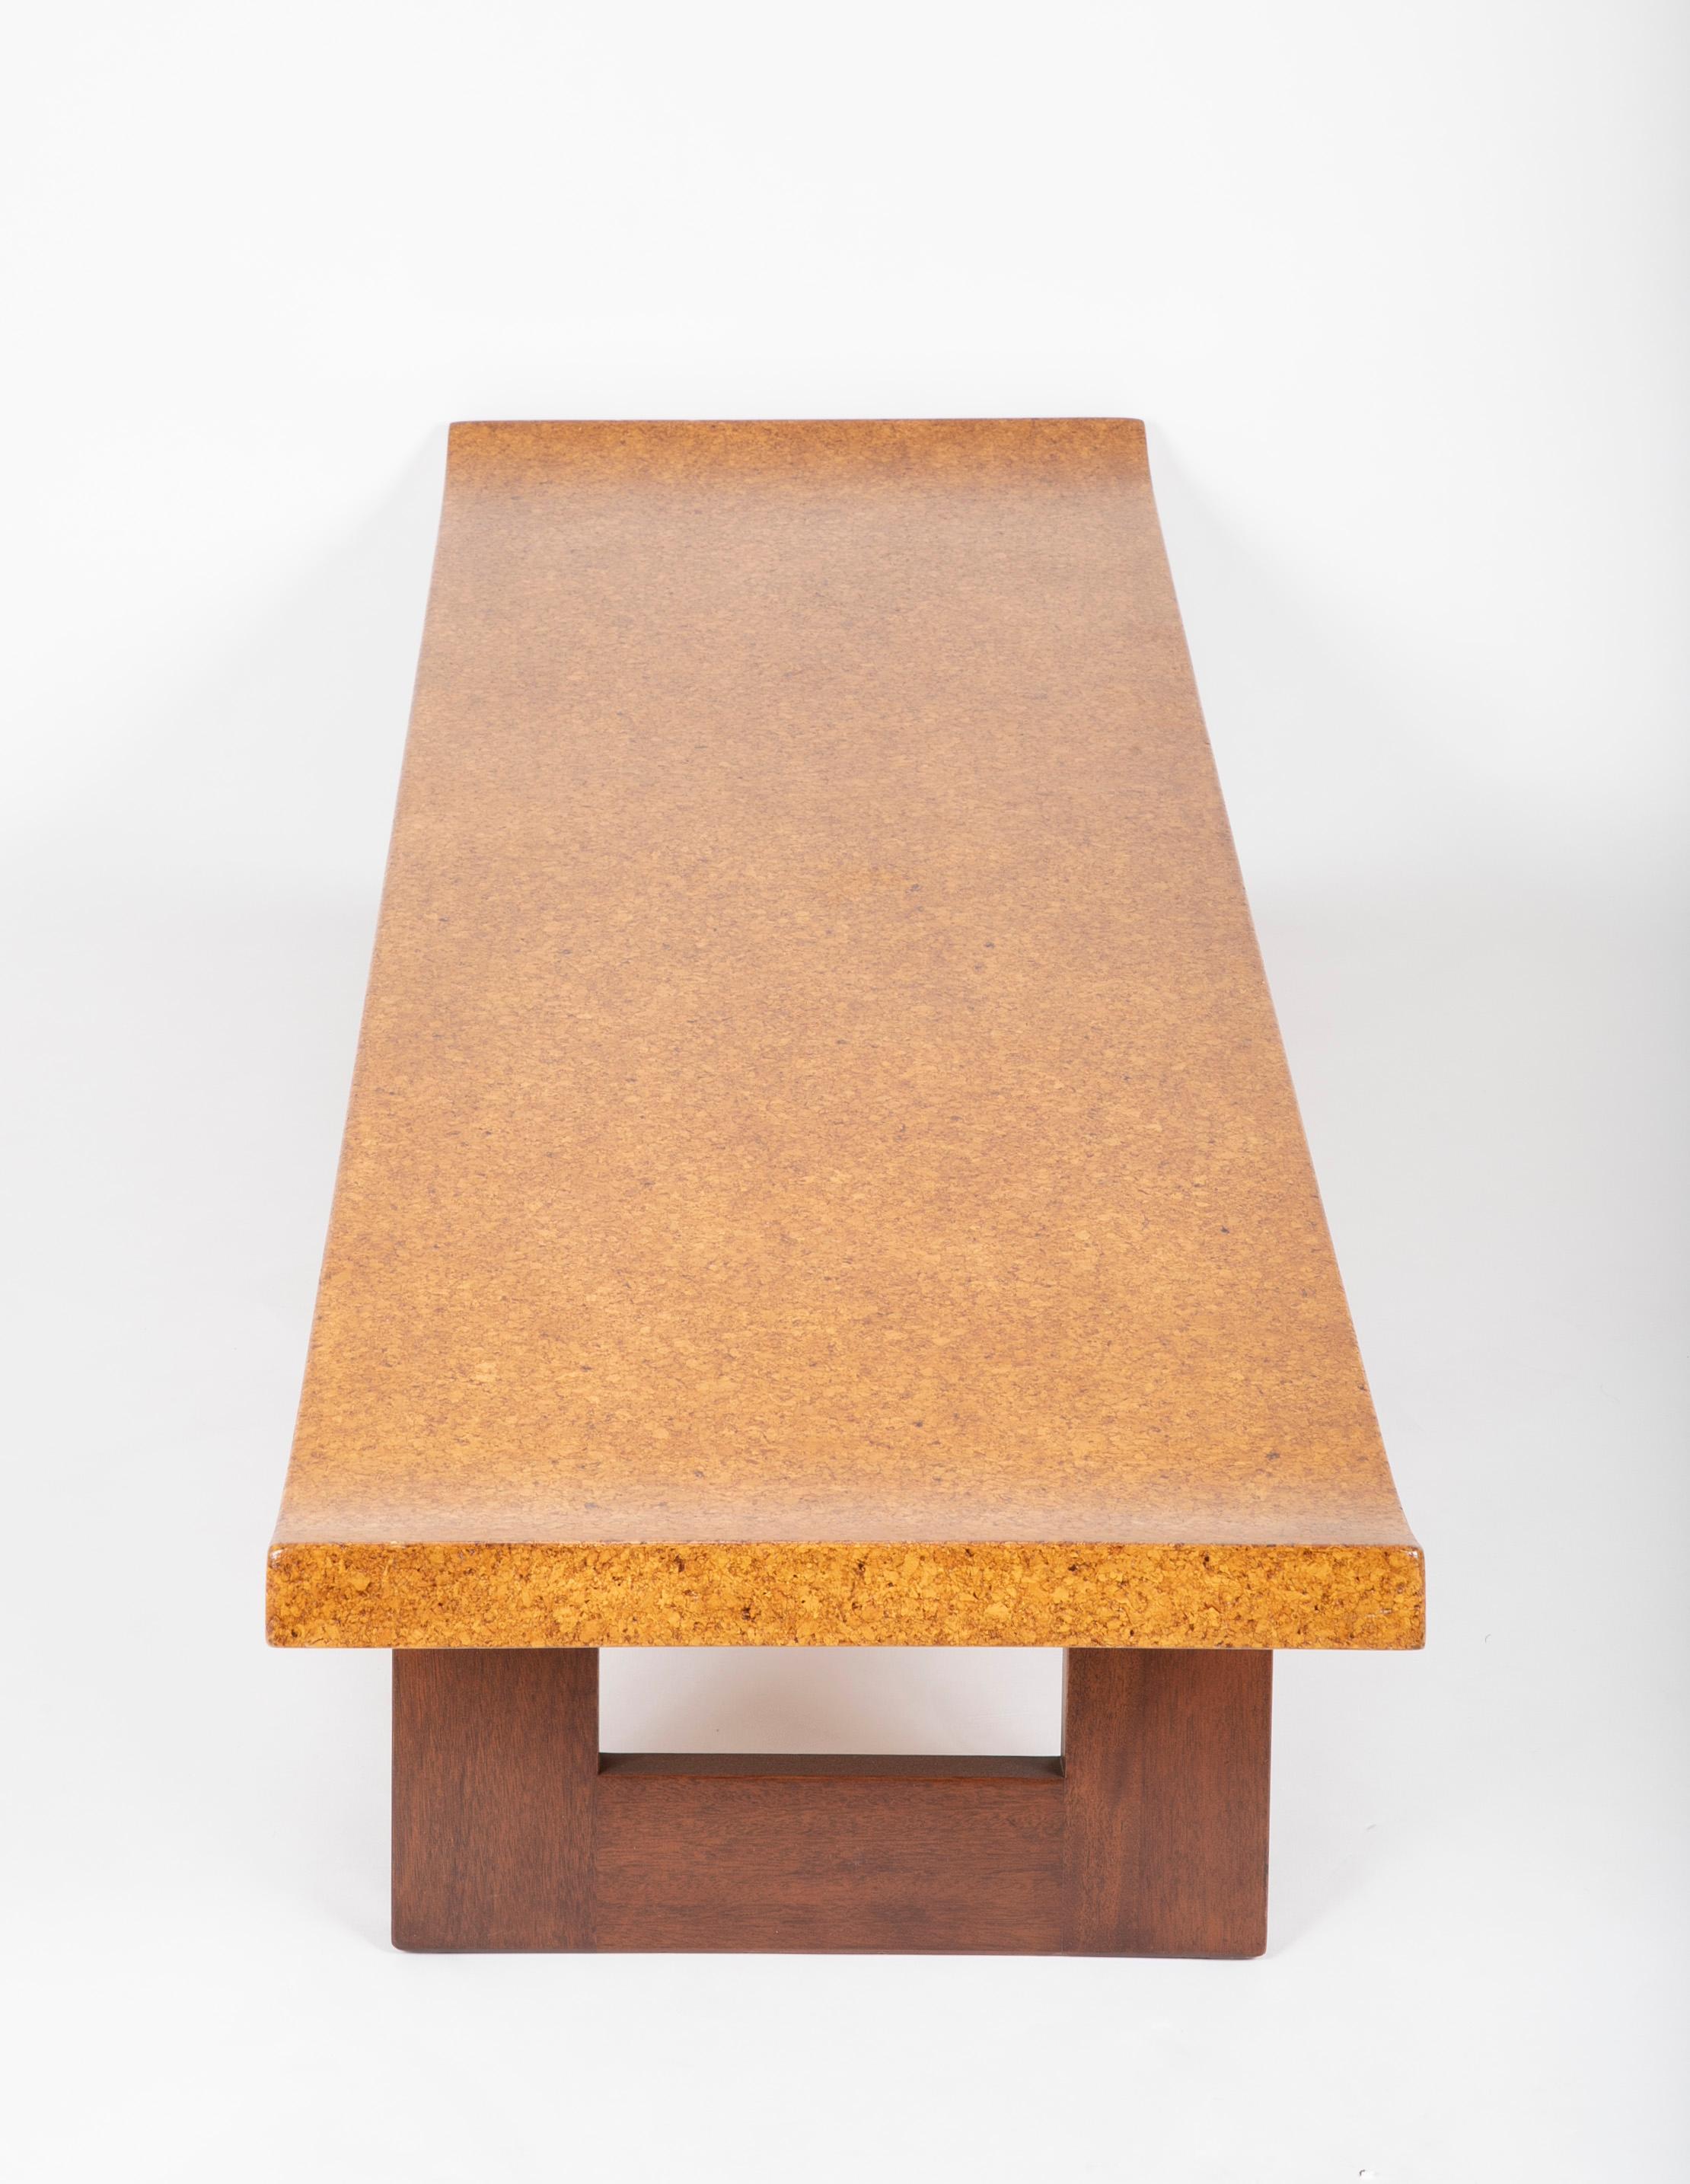 20th Century Cork Top Coffee Table by Paul Frankl